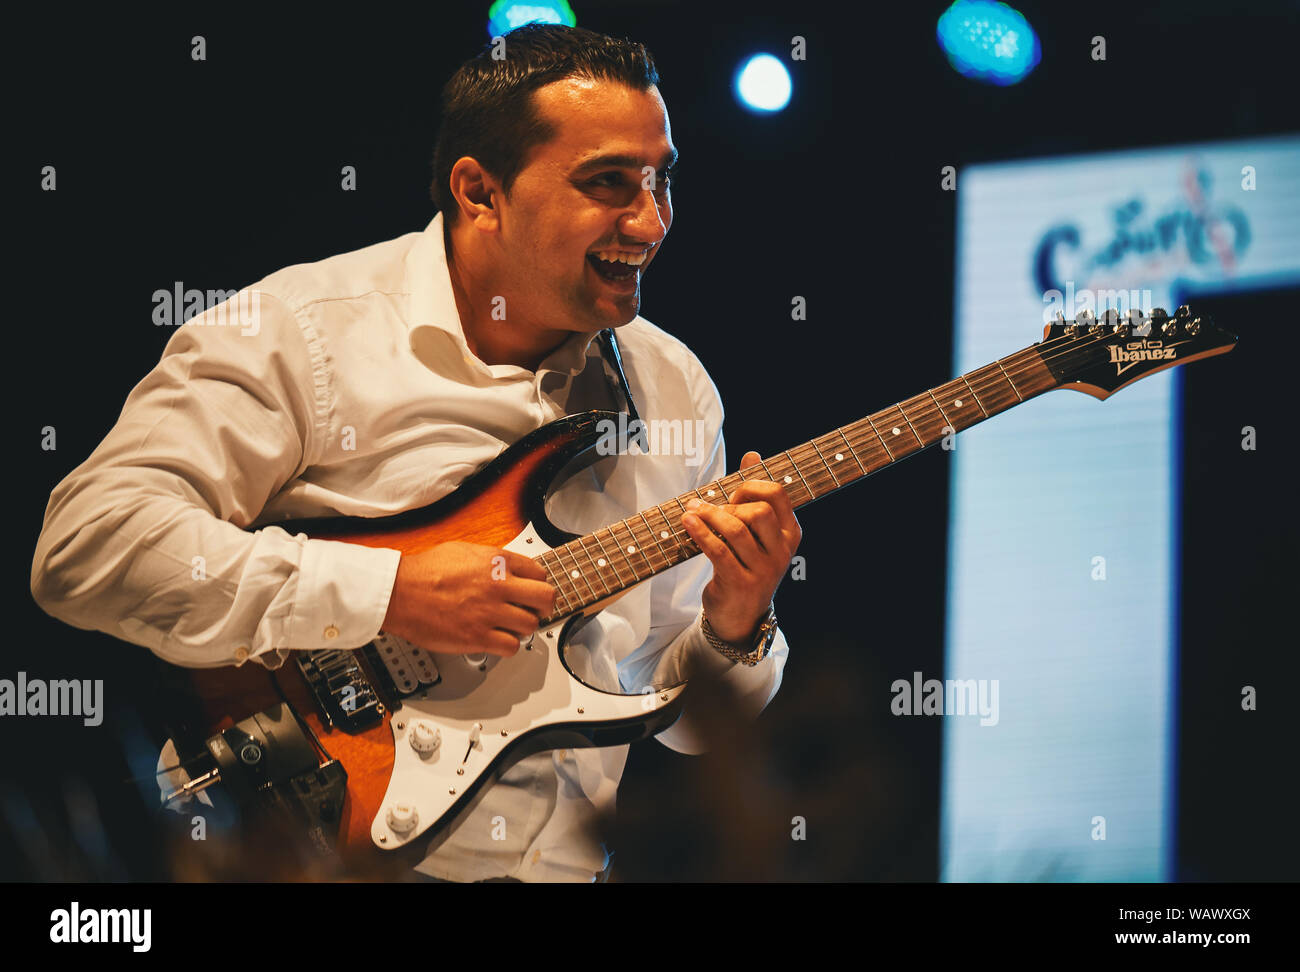 Pranjani, Serbia - August 18, 2019: Bako Jovanovic on stage of the first festival of violinists in Serbia, famous guitarist of traditional Serbian mus Stock Photo